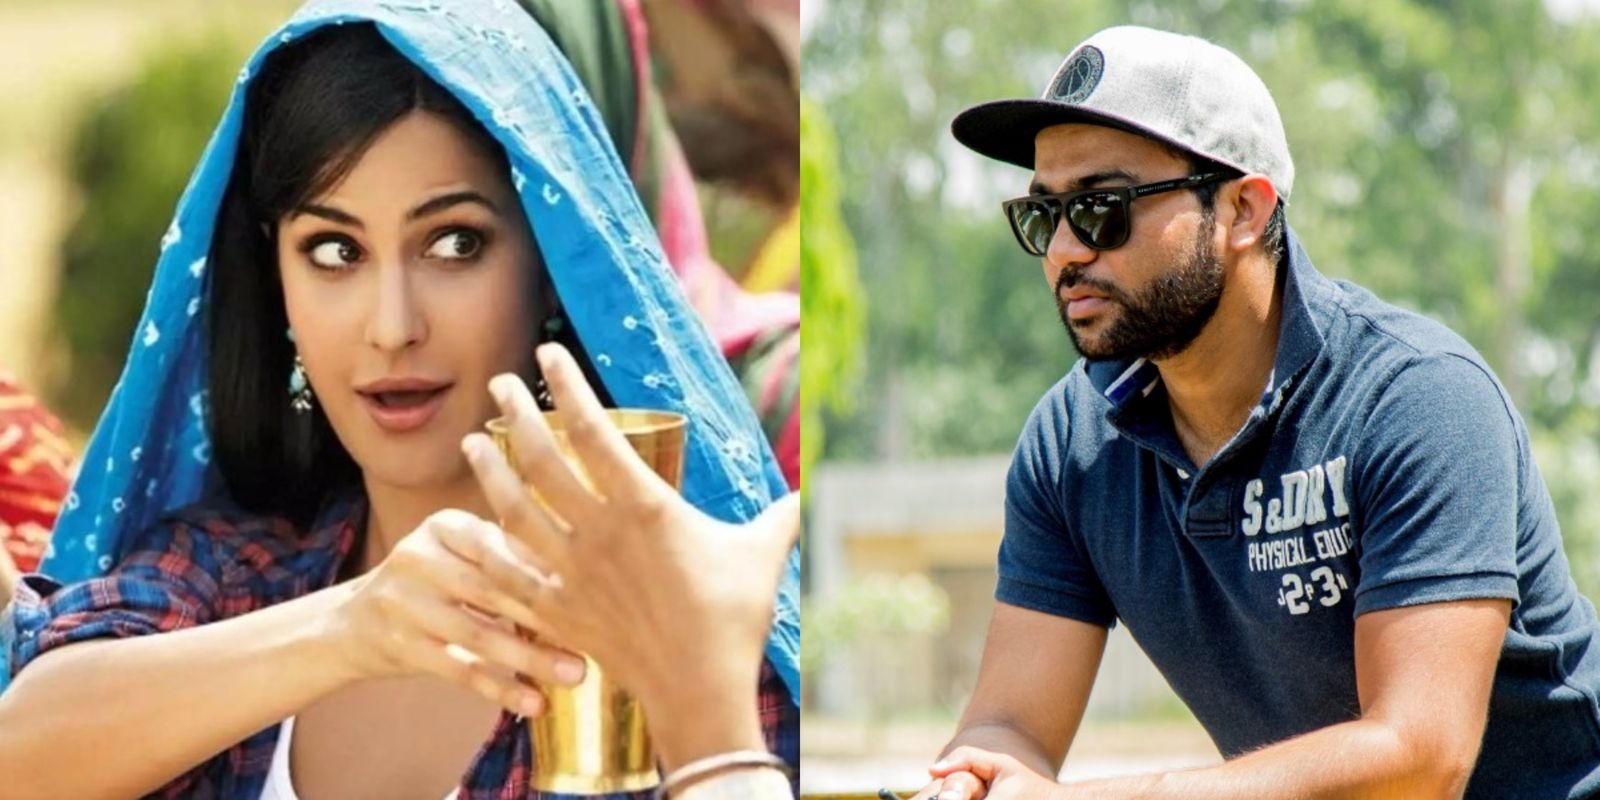 Ali Abbas Zafar On Working With Katrina Kaif In Mere Brother Ki Dulhan: ‘We Are Like Chalk And Cheese’